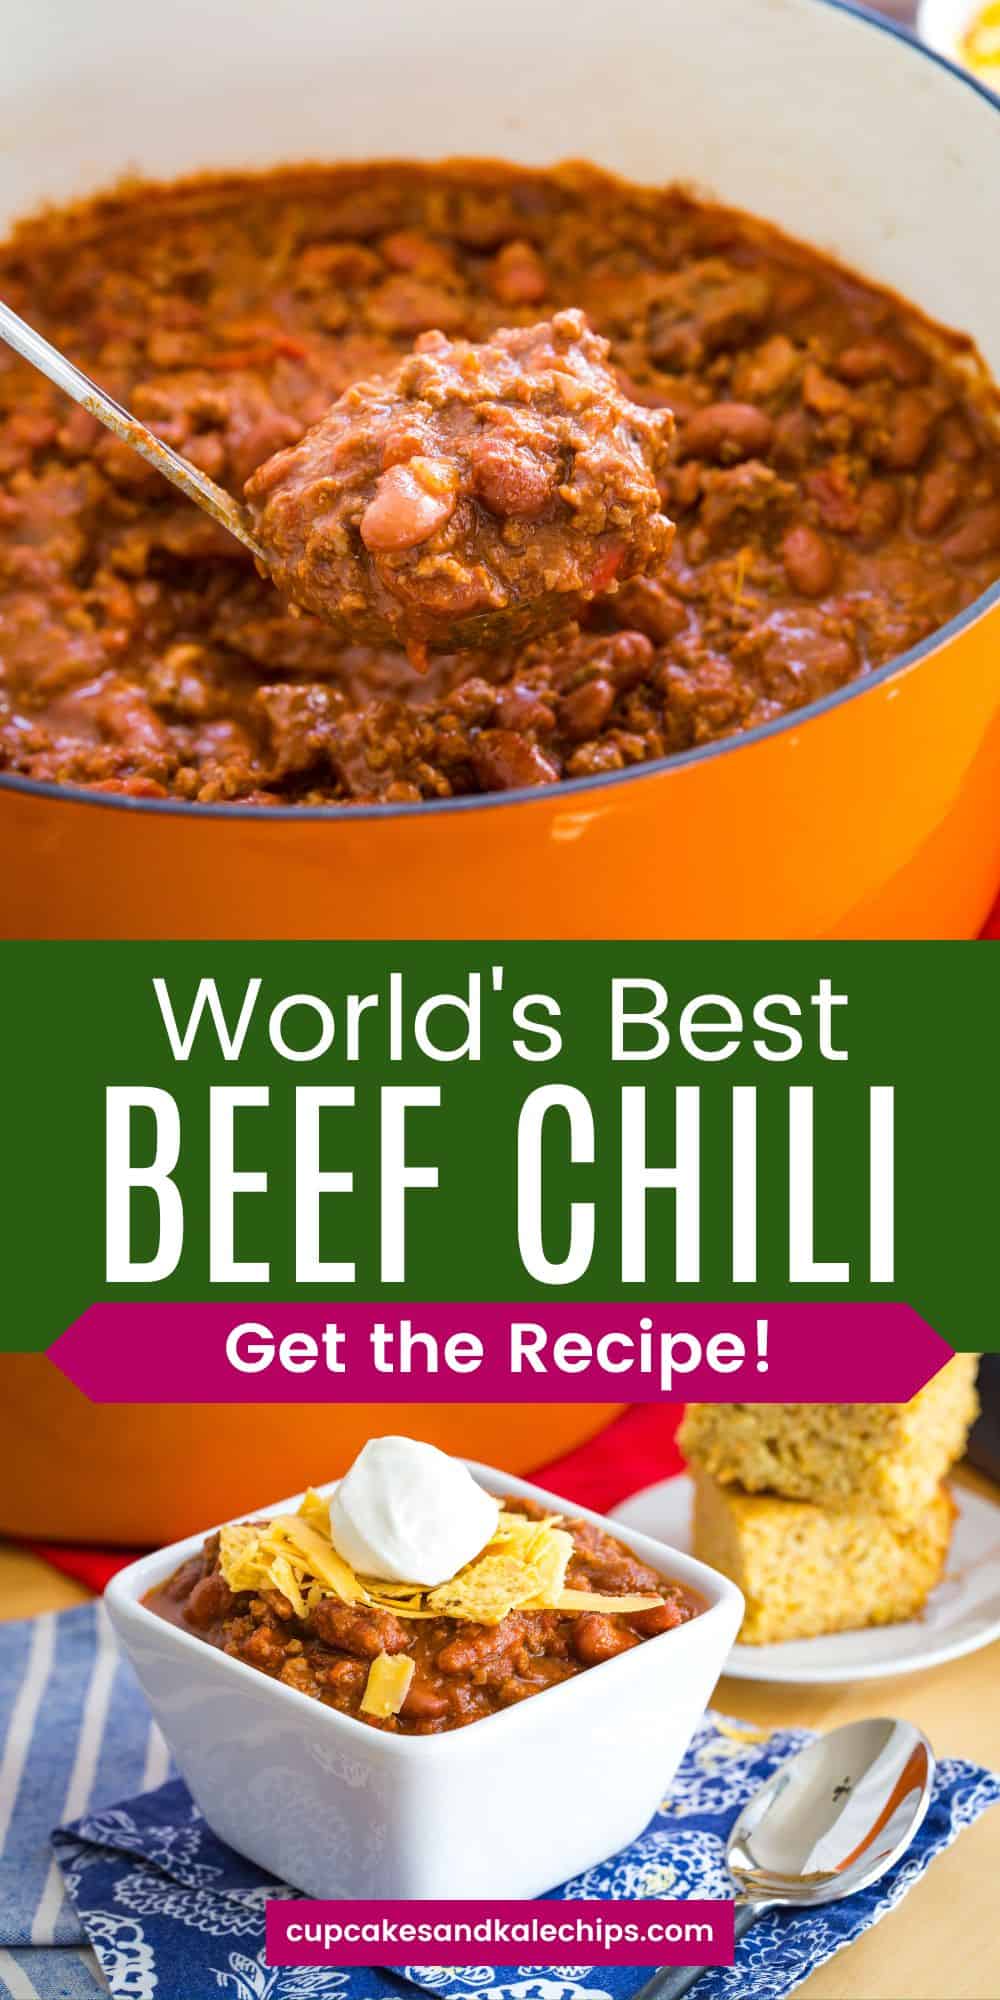 Homemade Beef Chili - The World's Best! l Cupcakes & Kale Chips